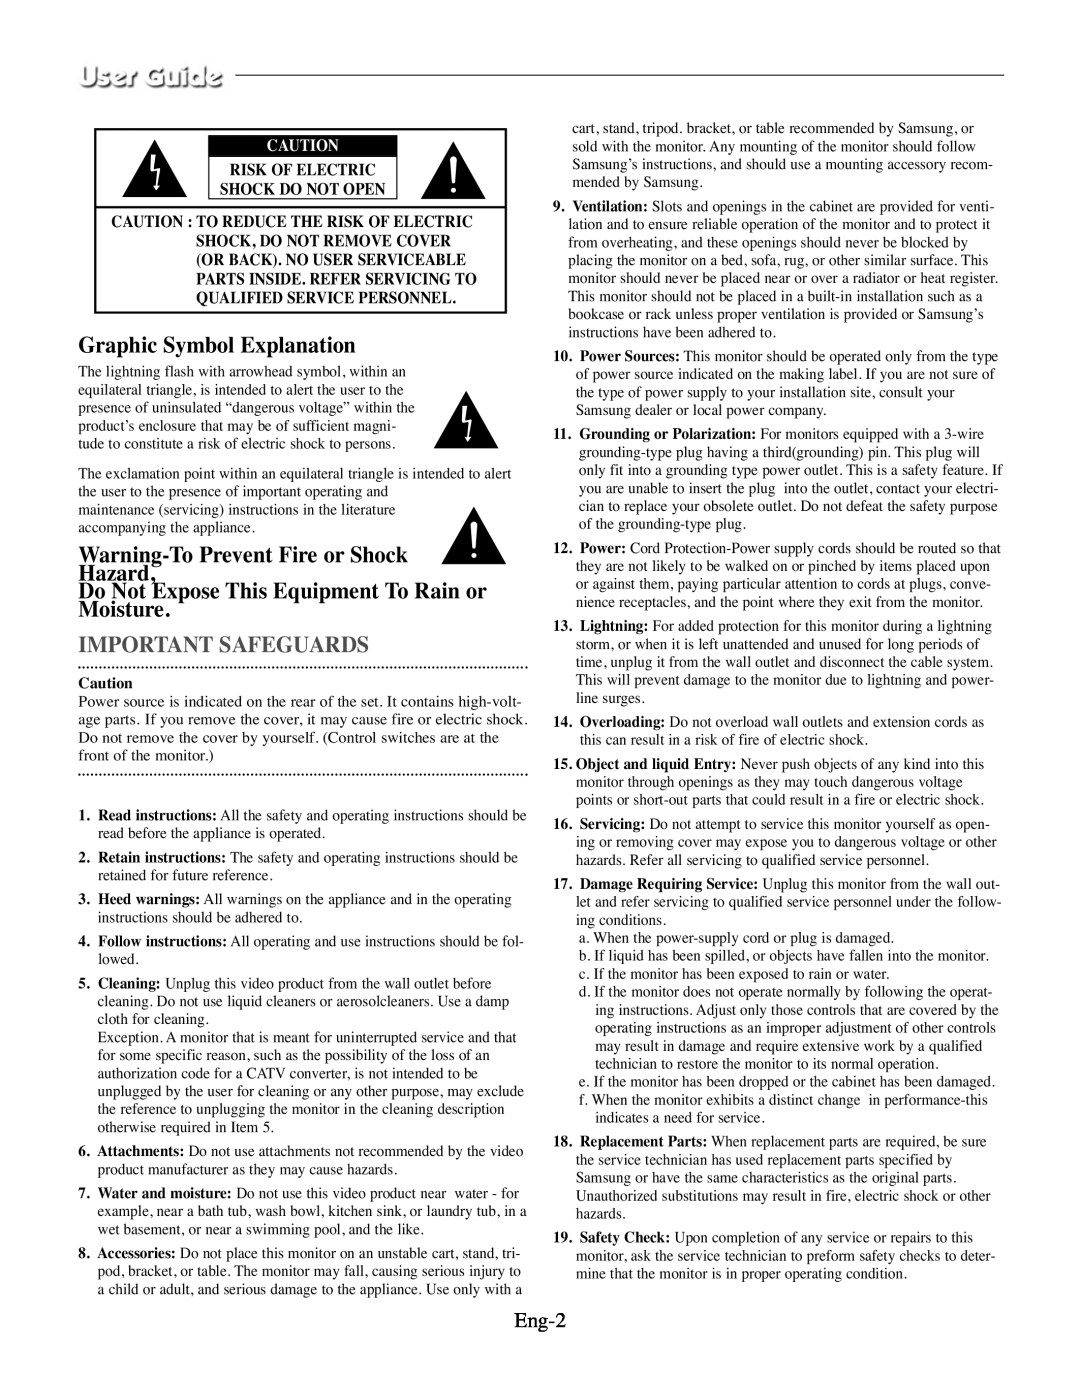 Samsung SMO-210TRP manual Graphic Symbol Explanation, Warning-To Prevent Fire or Shock Hazard, Important Safeguards, Eng-2 